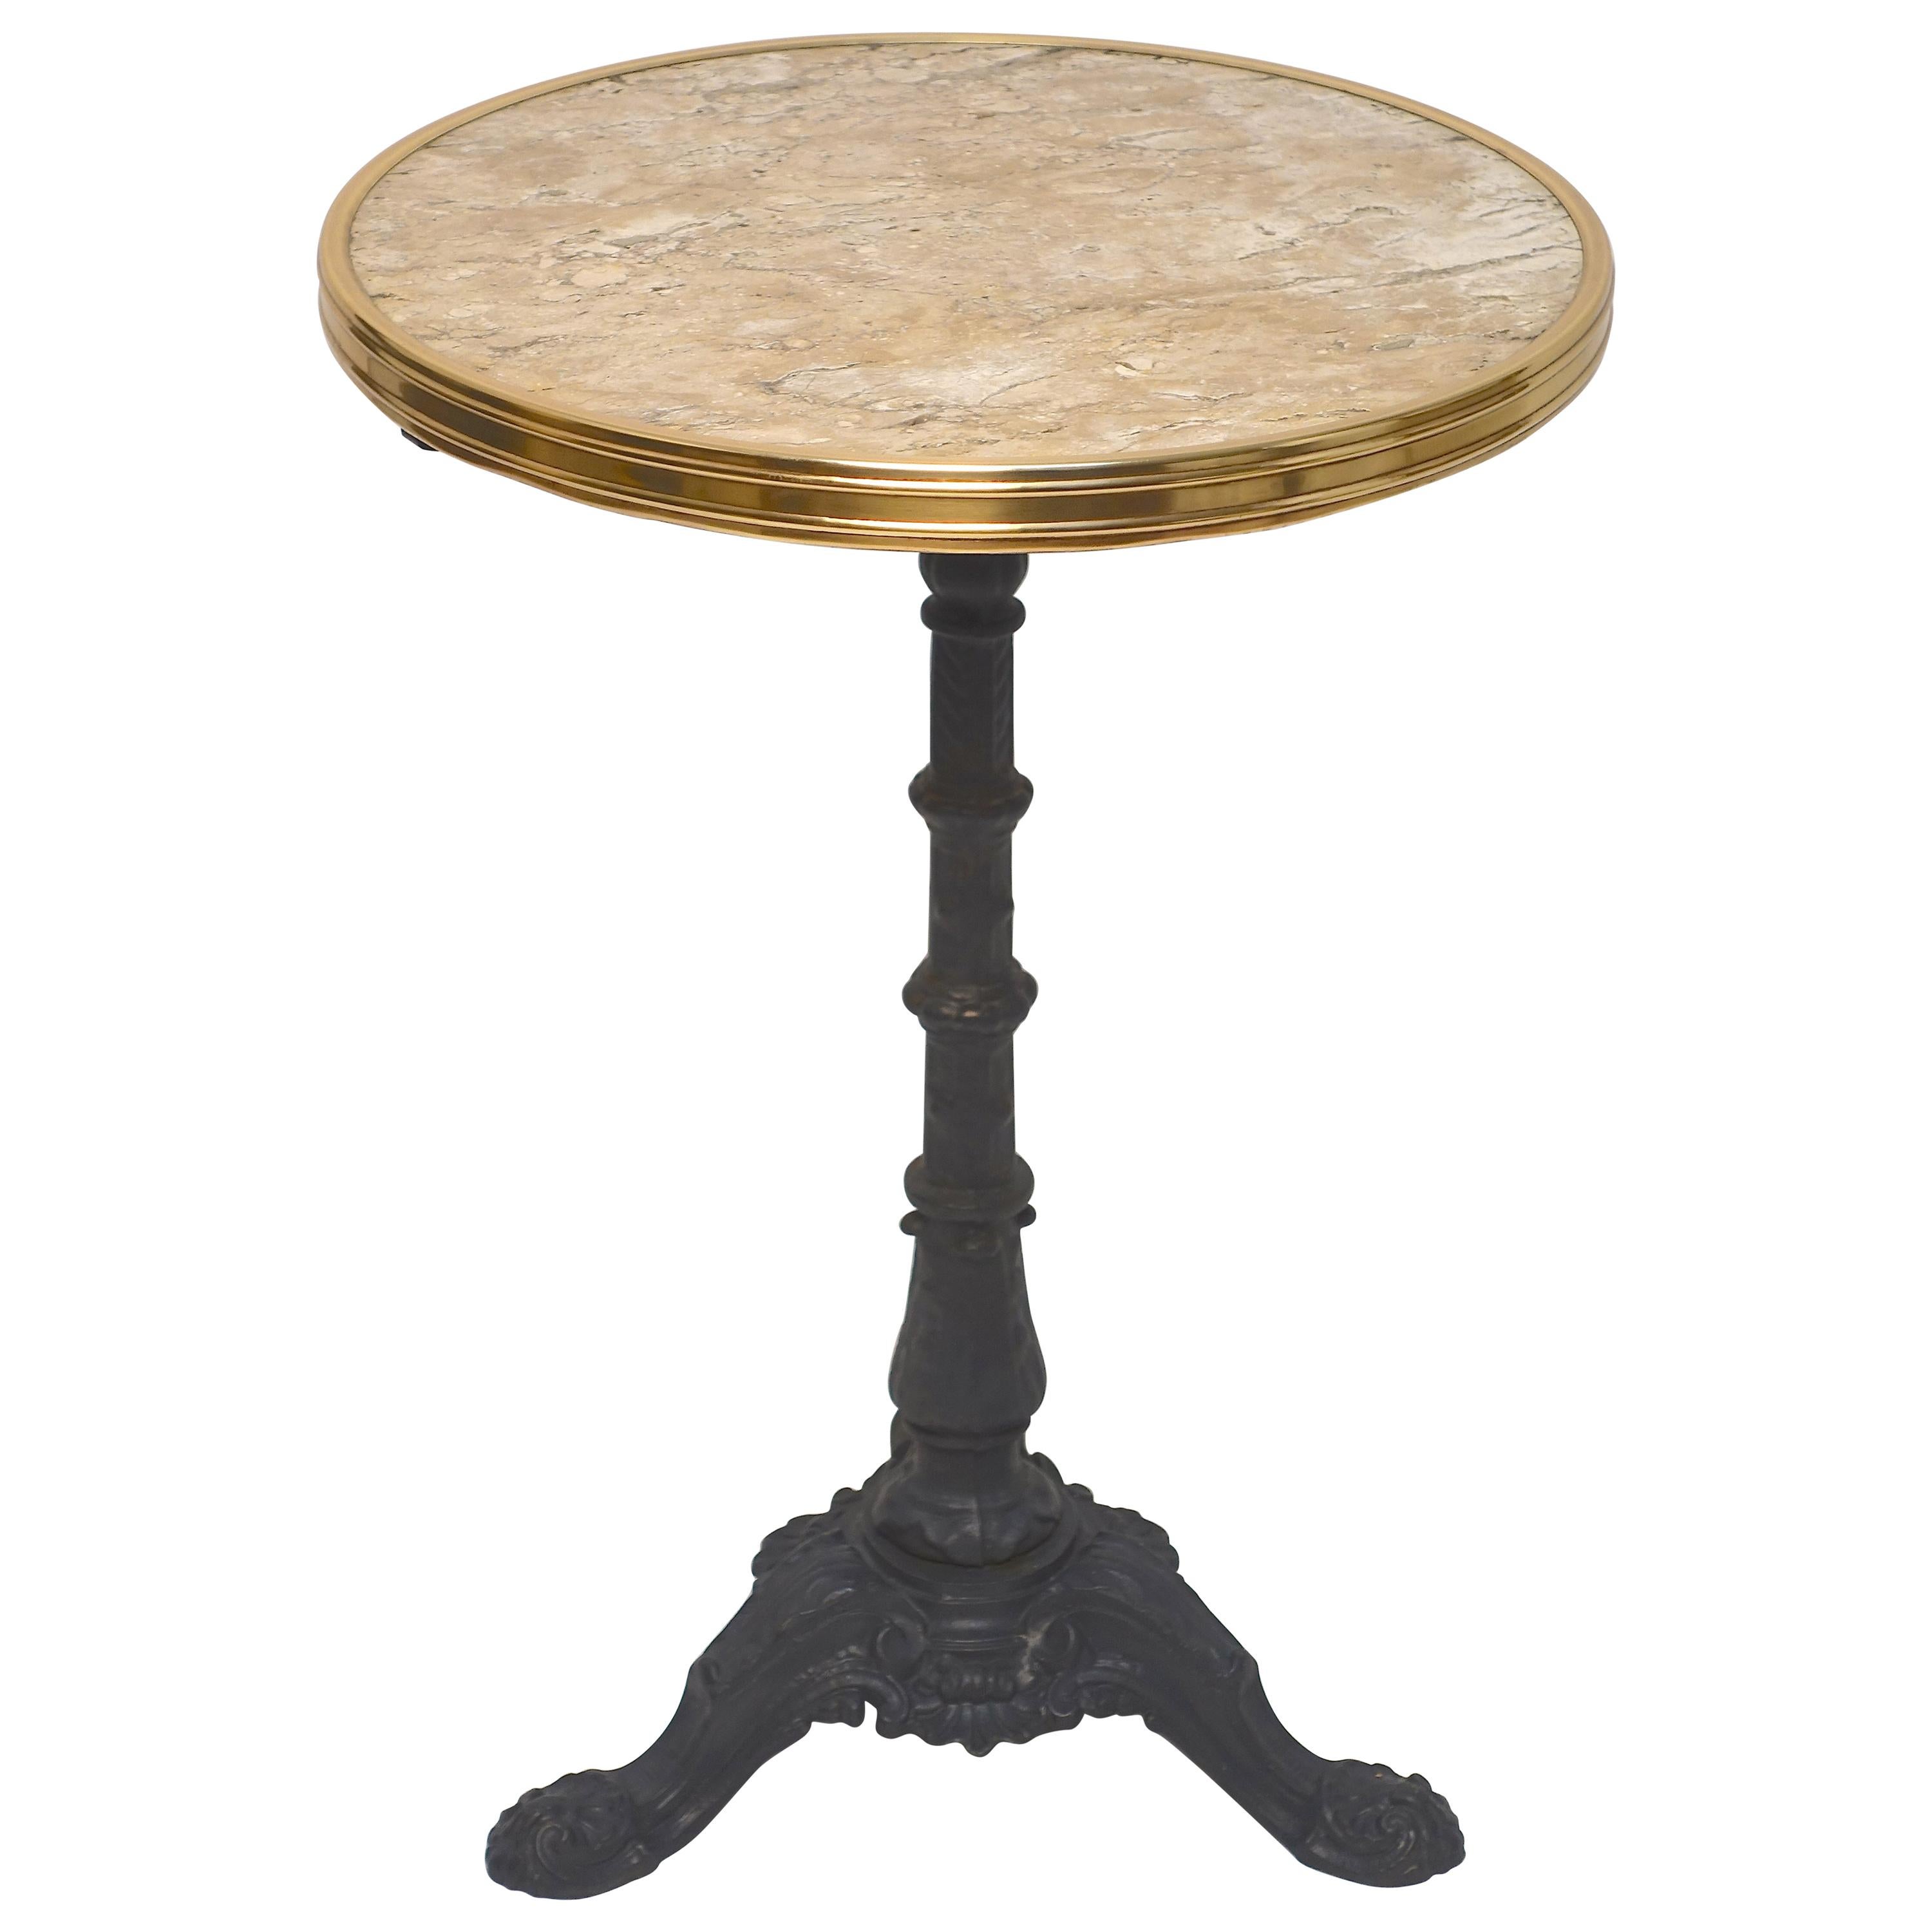 French Gueridon Bistro Table - Early 20th Century